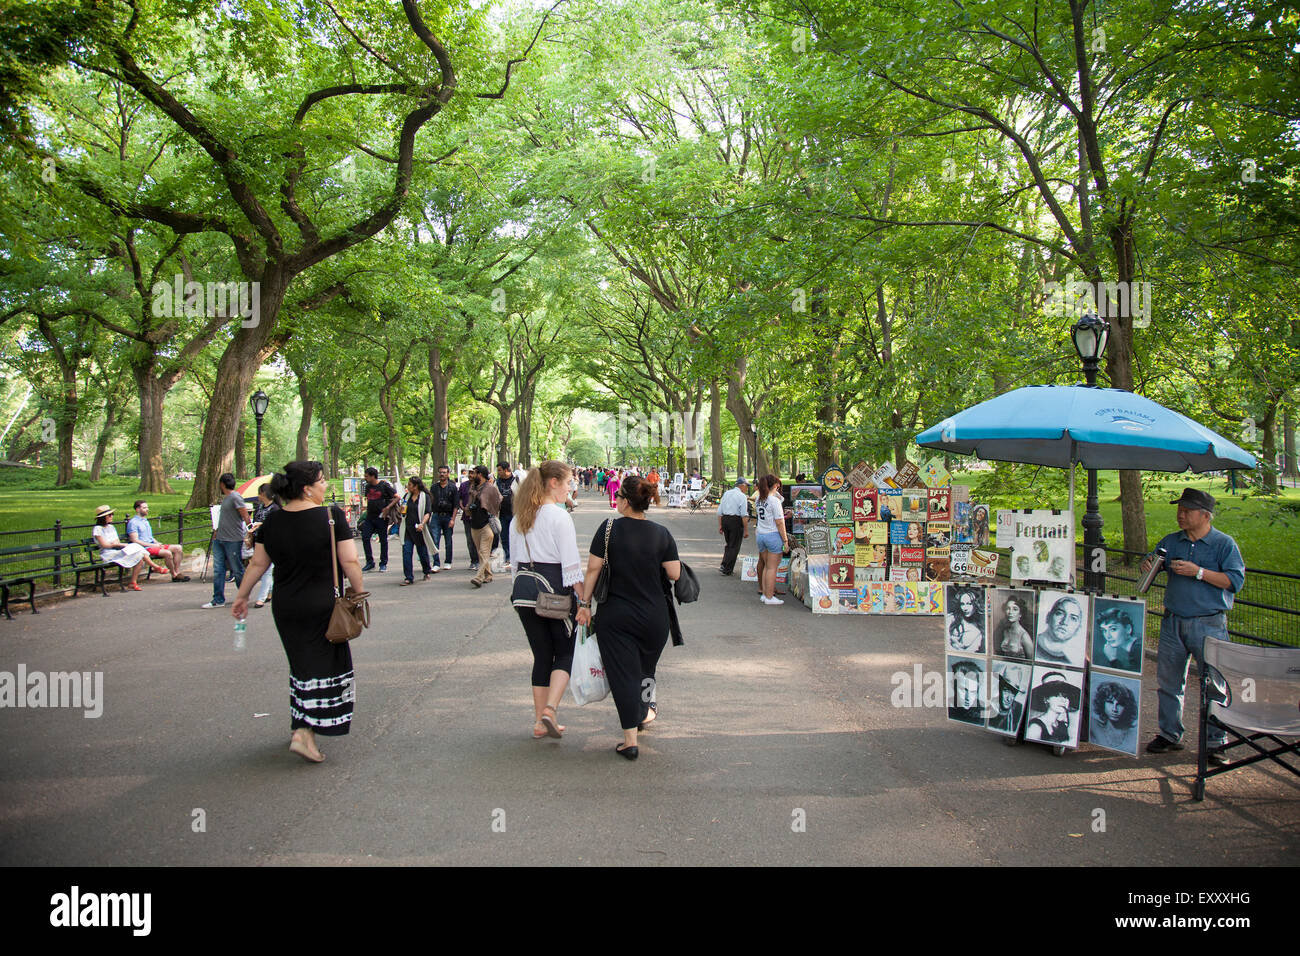 NEW YORK - May 25, 2015: People walking in Literary Walk, in Central Park, New York City. Central Park is an urban park in the c Stock Photo